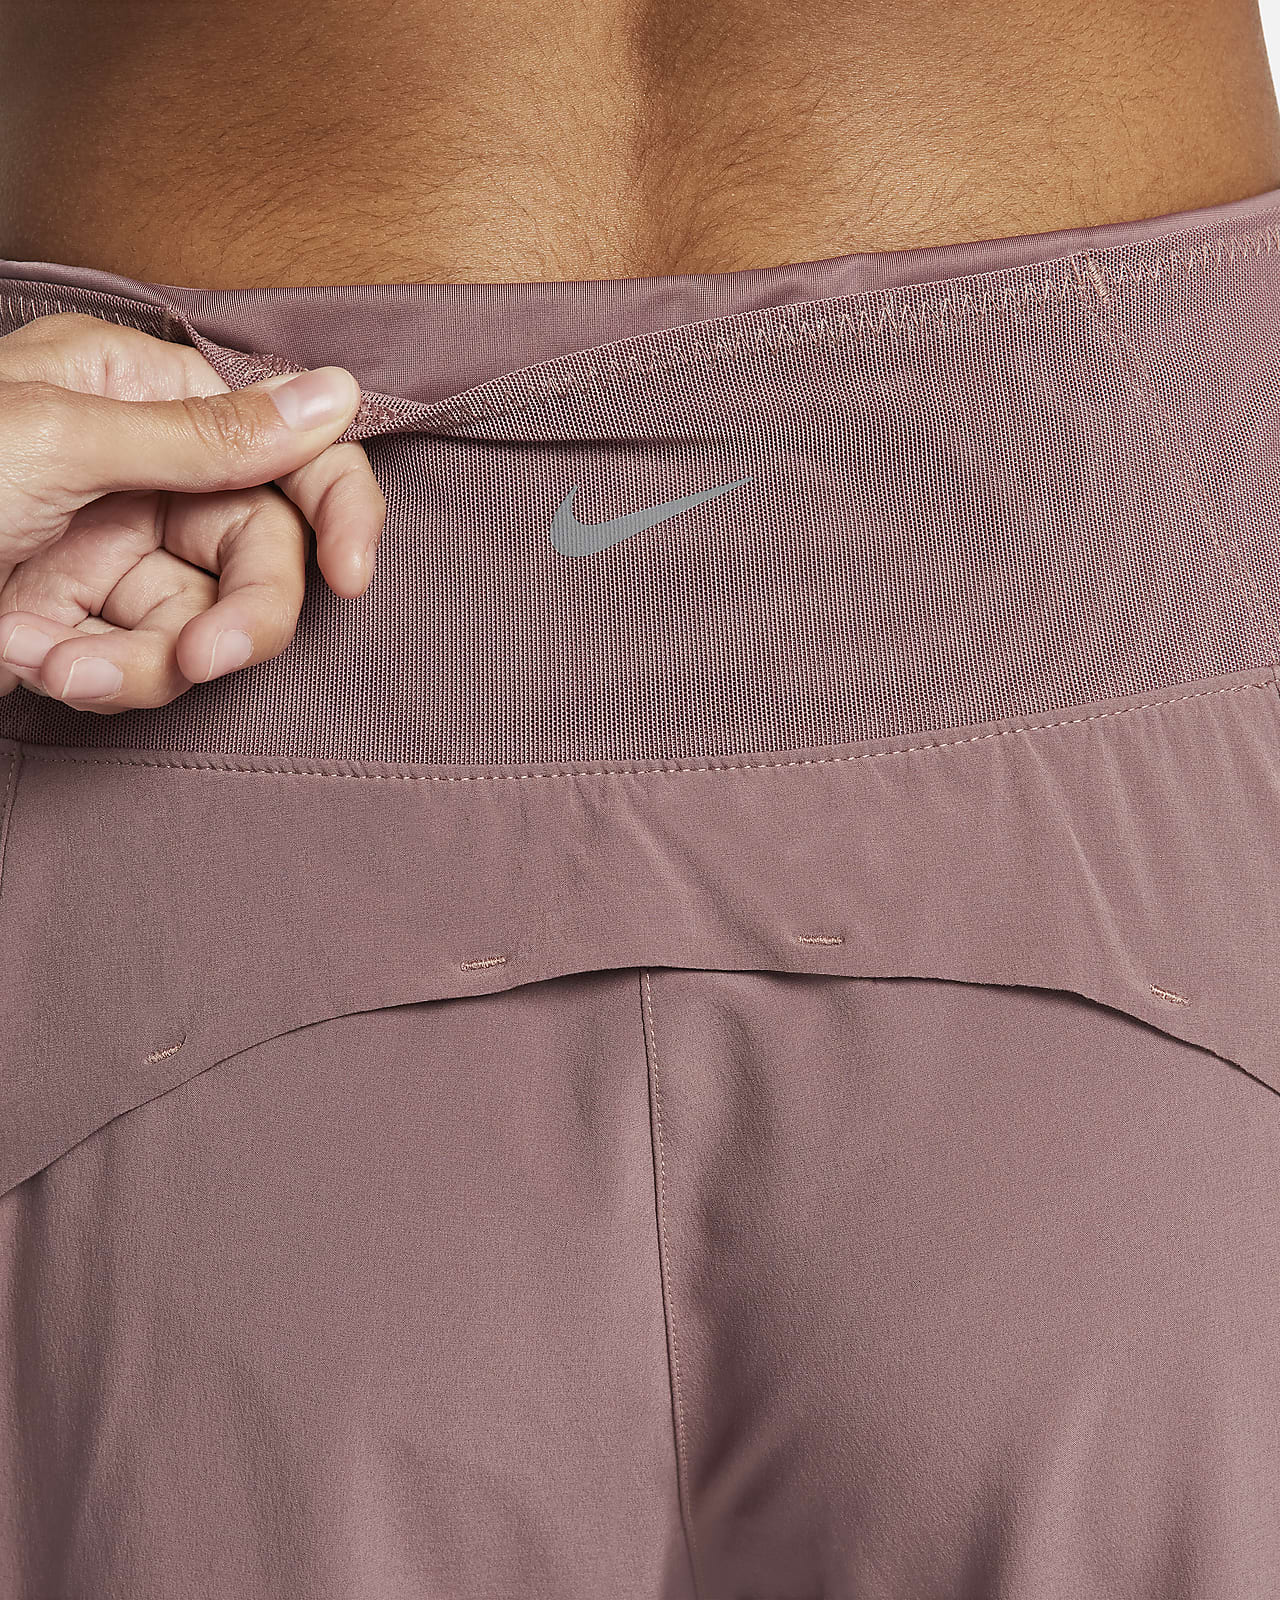 Nike Swift Women's 27 Running Pants. I really want to try these pants out.  #ad #running